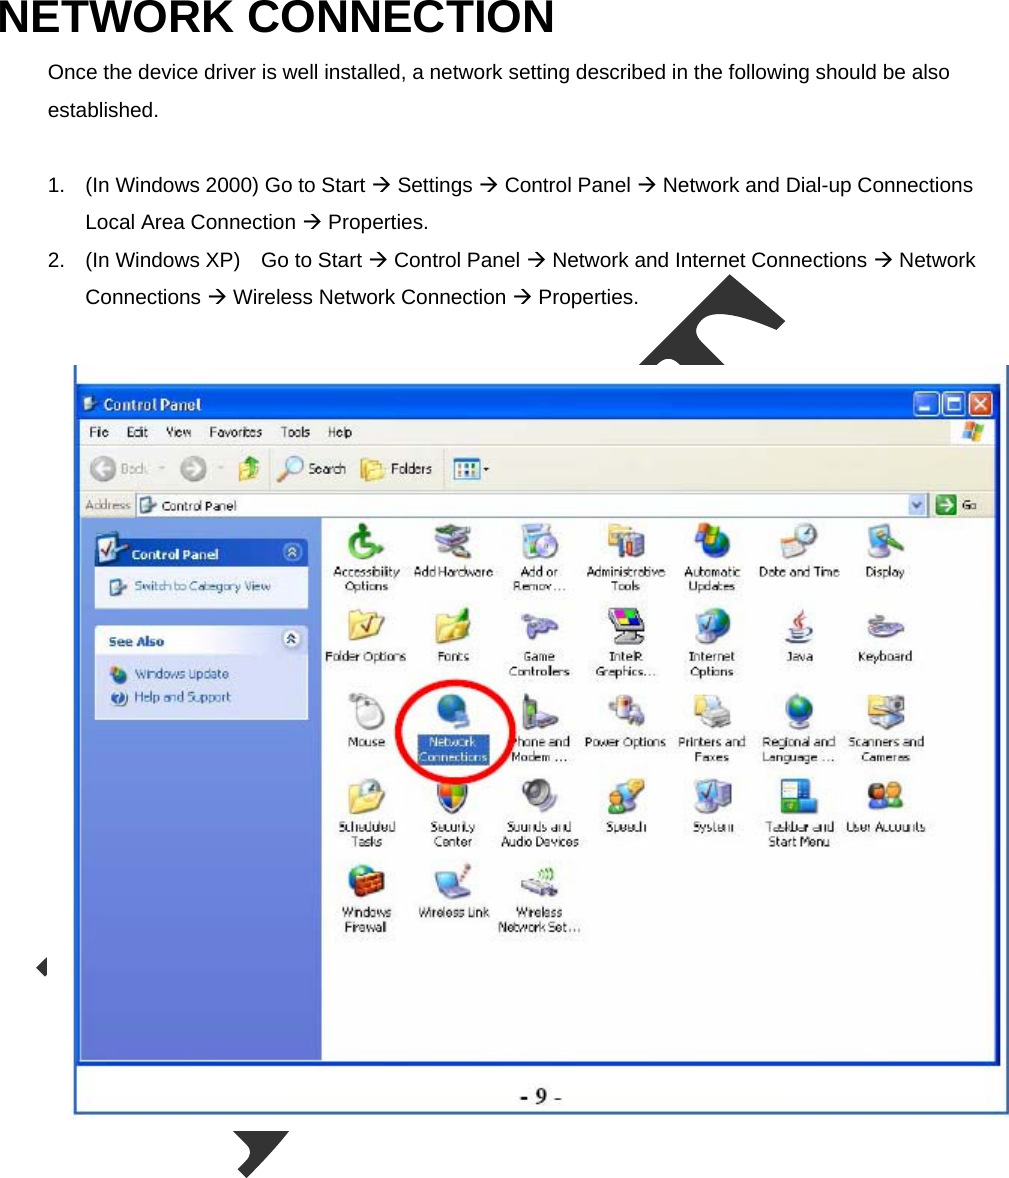  NETWORK CONNECTION   Once the device driver is well installed, a network setting described in the following should be also established.    1.  (In Windows 2000) Go to Start  Settings  Control Panel  Network and Dial-up Connections   Local Area Connection  Properties. 2.  (In Windows XP)    Go to Start  Control Panel  Network and Internet Connections  Network Connections  Wireless Network Connection  Properties.   